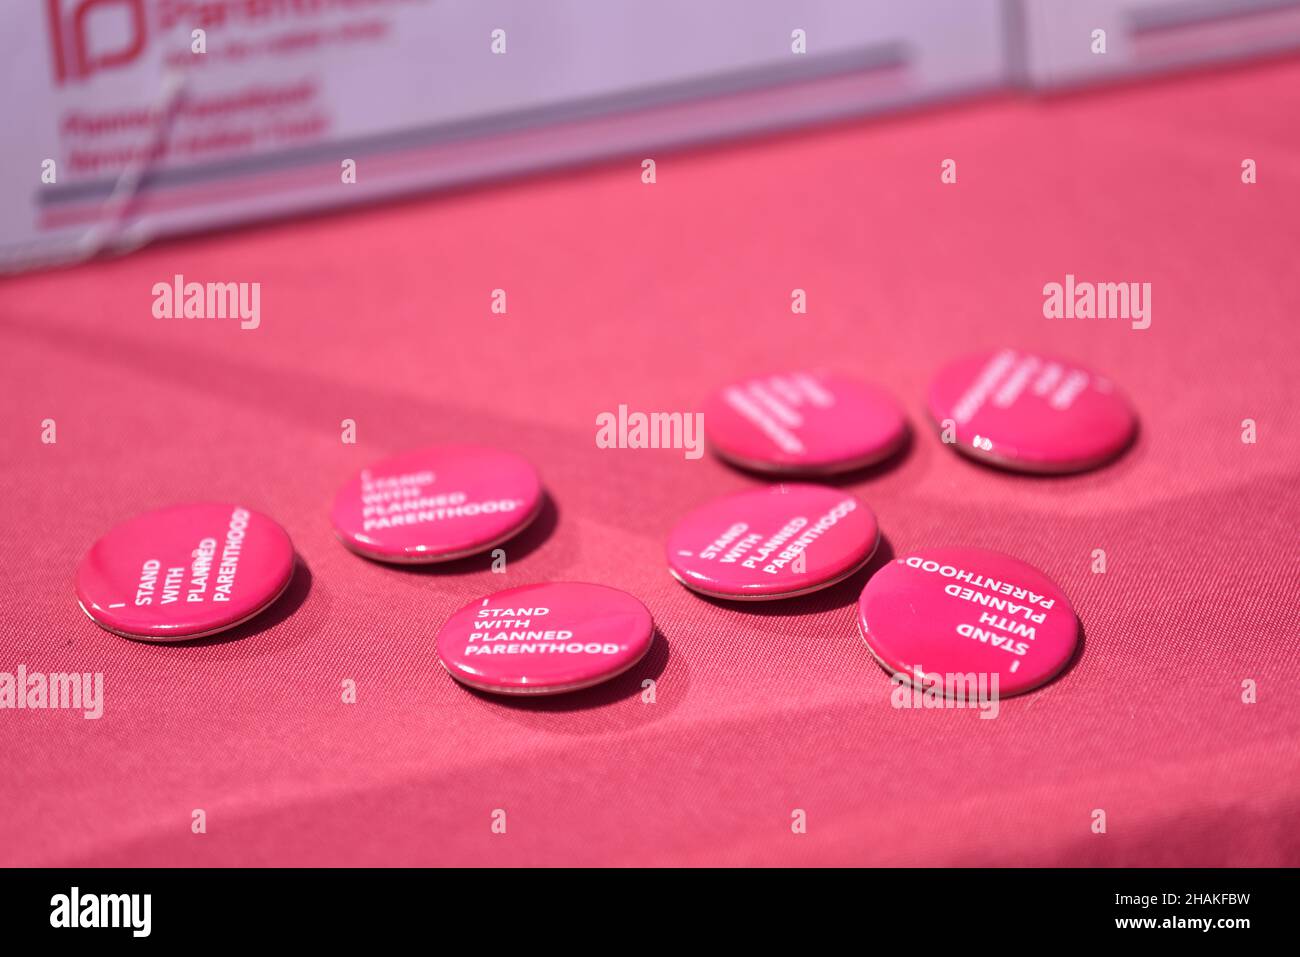 Planned Parenthood buttons lie on a table during a labor rally on May 1 in the state of Vermont, USA. Stock Photo